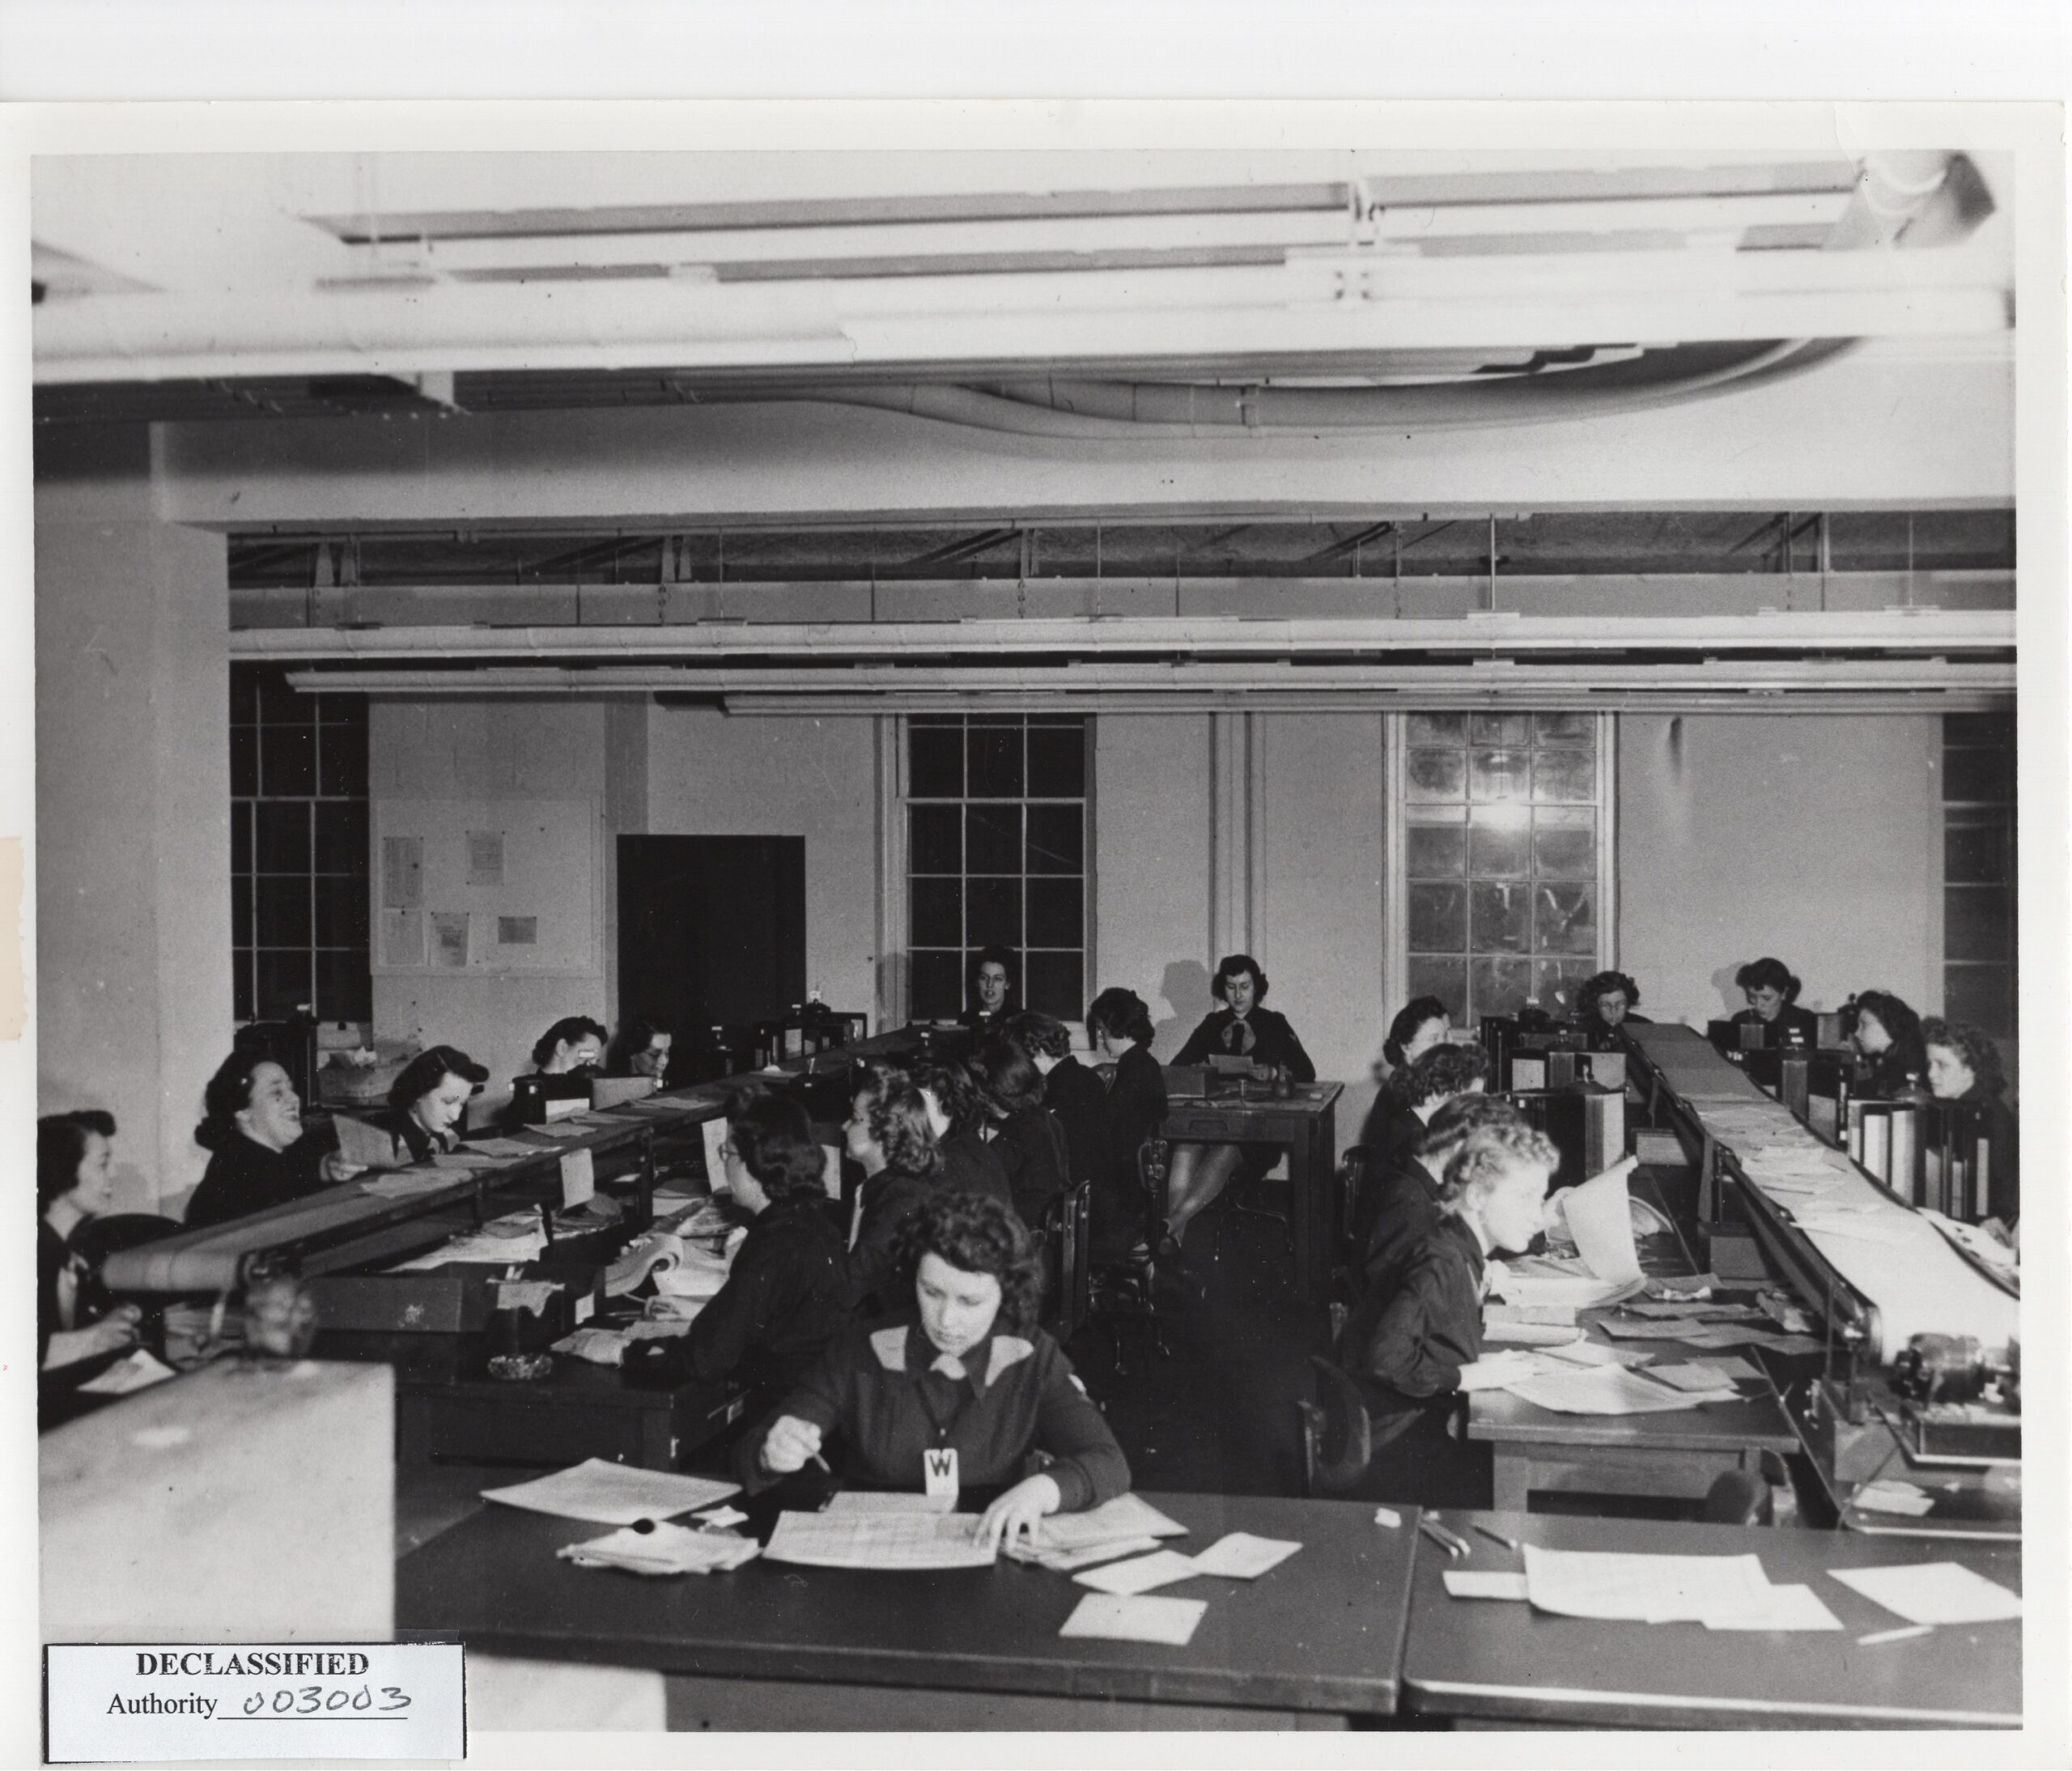 Women breaking naval codes during WWII